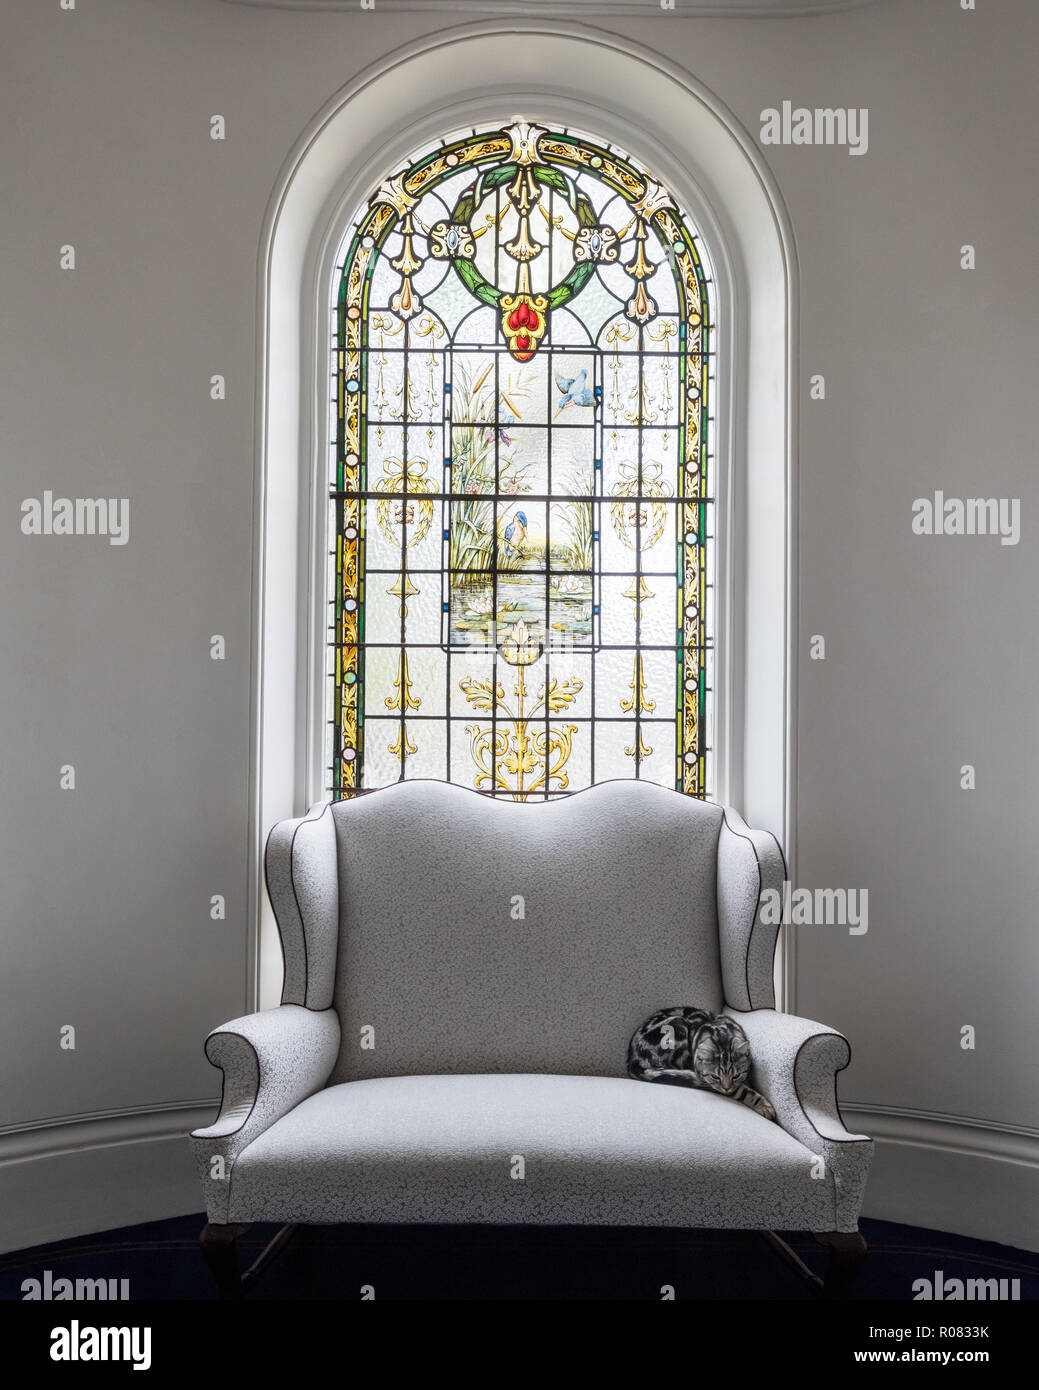 Cat on armchair by stained glass window Stock Photo